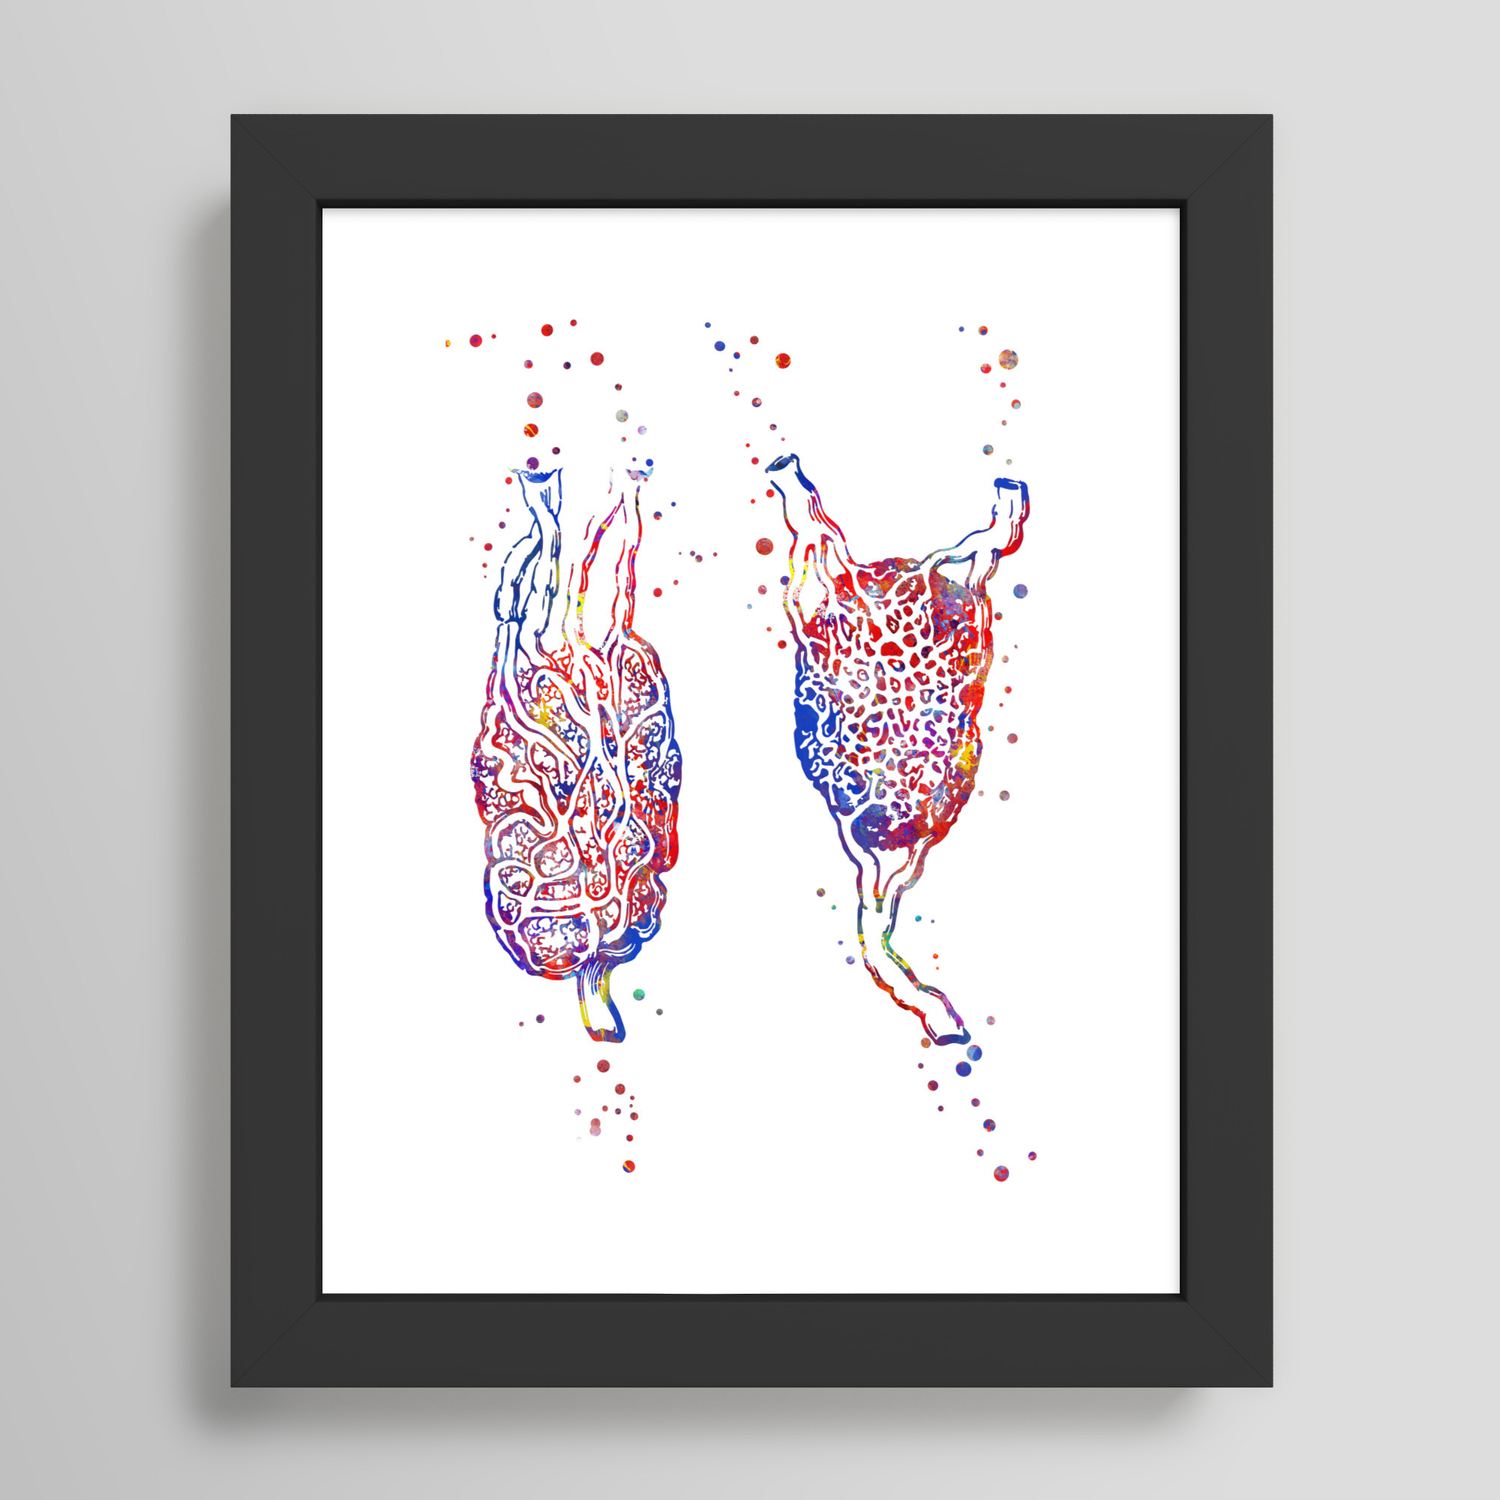 Lymph node lymph node structure lymph node art watercolor lymph node the anatomical structure of the lymph node lymph node poster